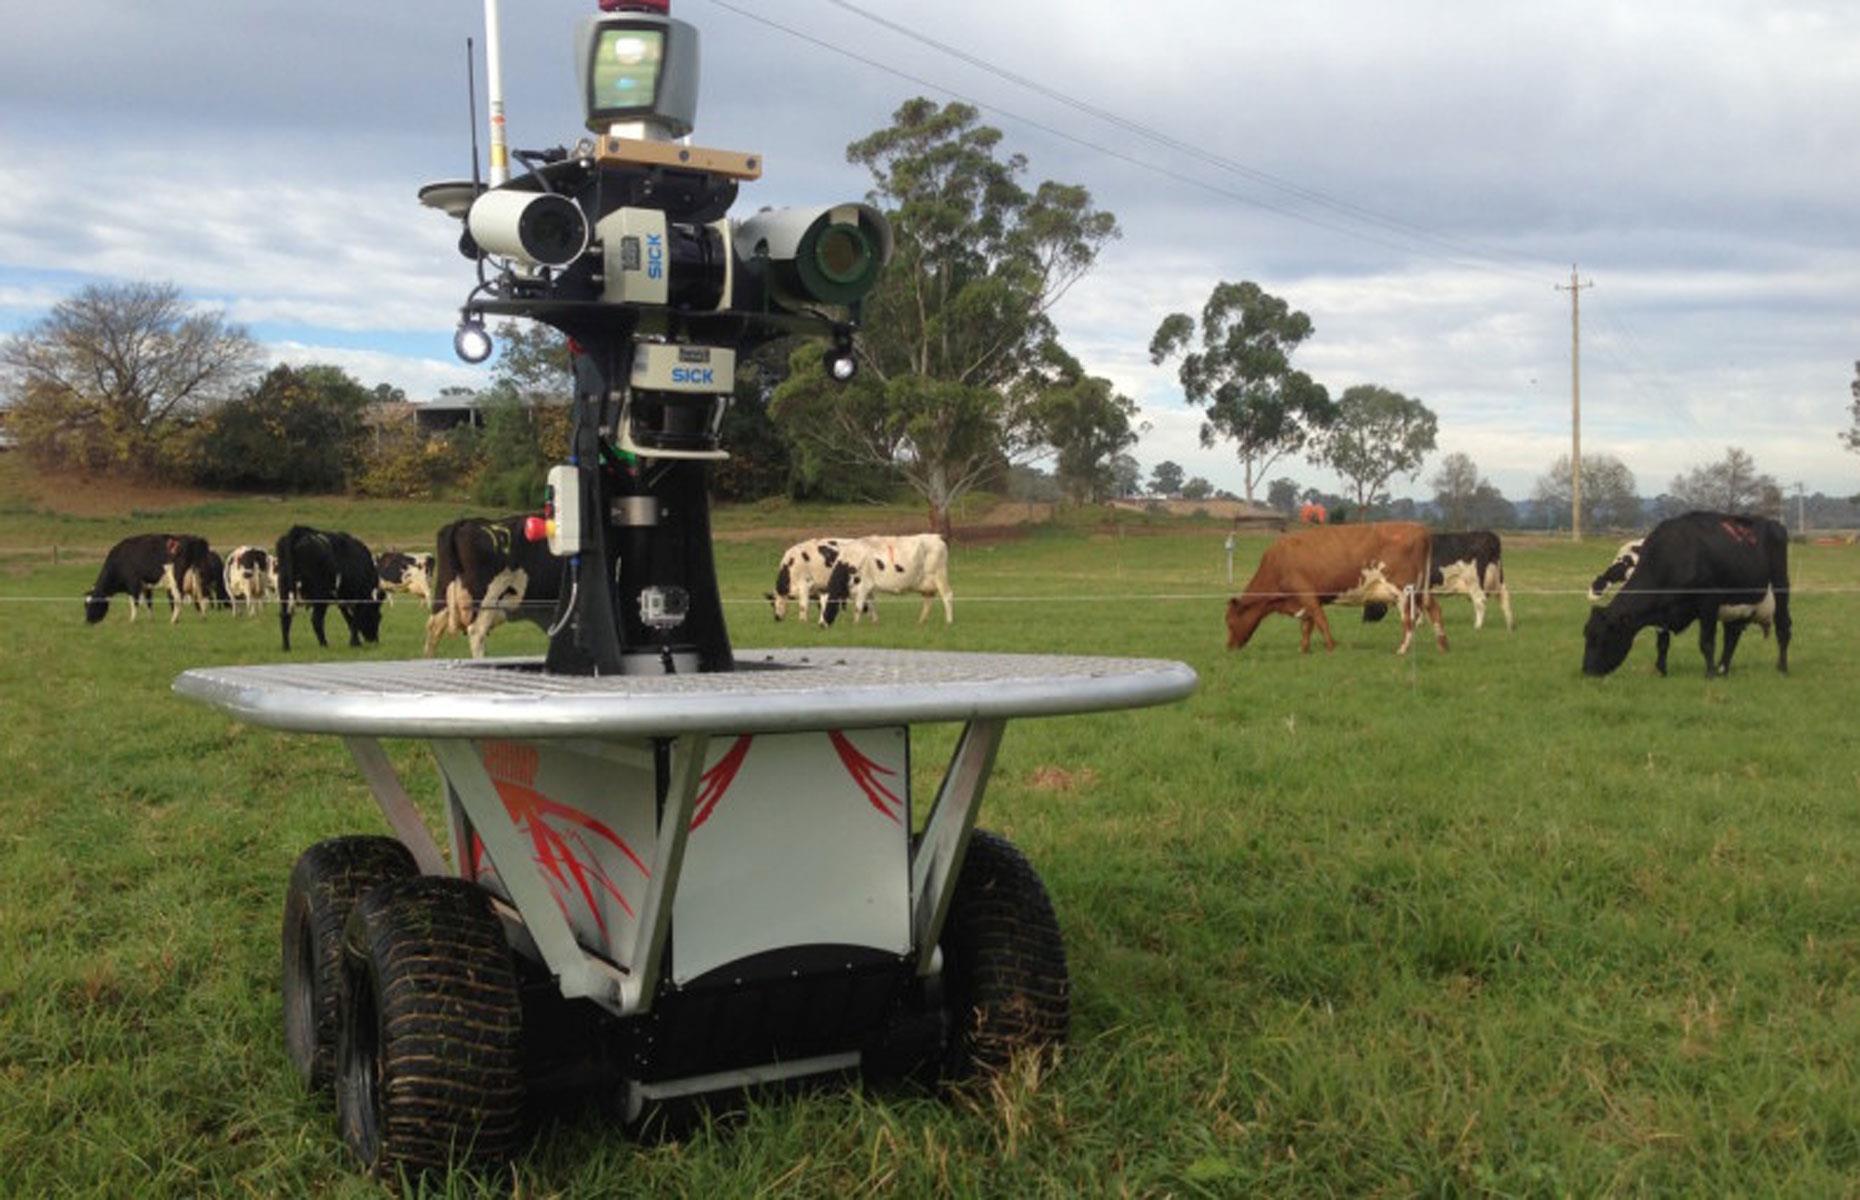 <p>You've probably heard of Babe the sheep-pig – but what about SwagBot the sheep-robot?</p>  <p>In 2016, the Australian Centre for Field Robotics announced that it had developed SwagBot: a shepherd robot that can tend to livestock such as sheep, cattle, and pigs. Packed with smart sensors, the robot is able to corral the animals in its care, analyze the quality of the pasture, and even moonlight as a vet by monitoring the health of its herd. </p>